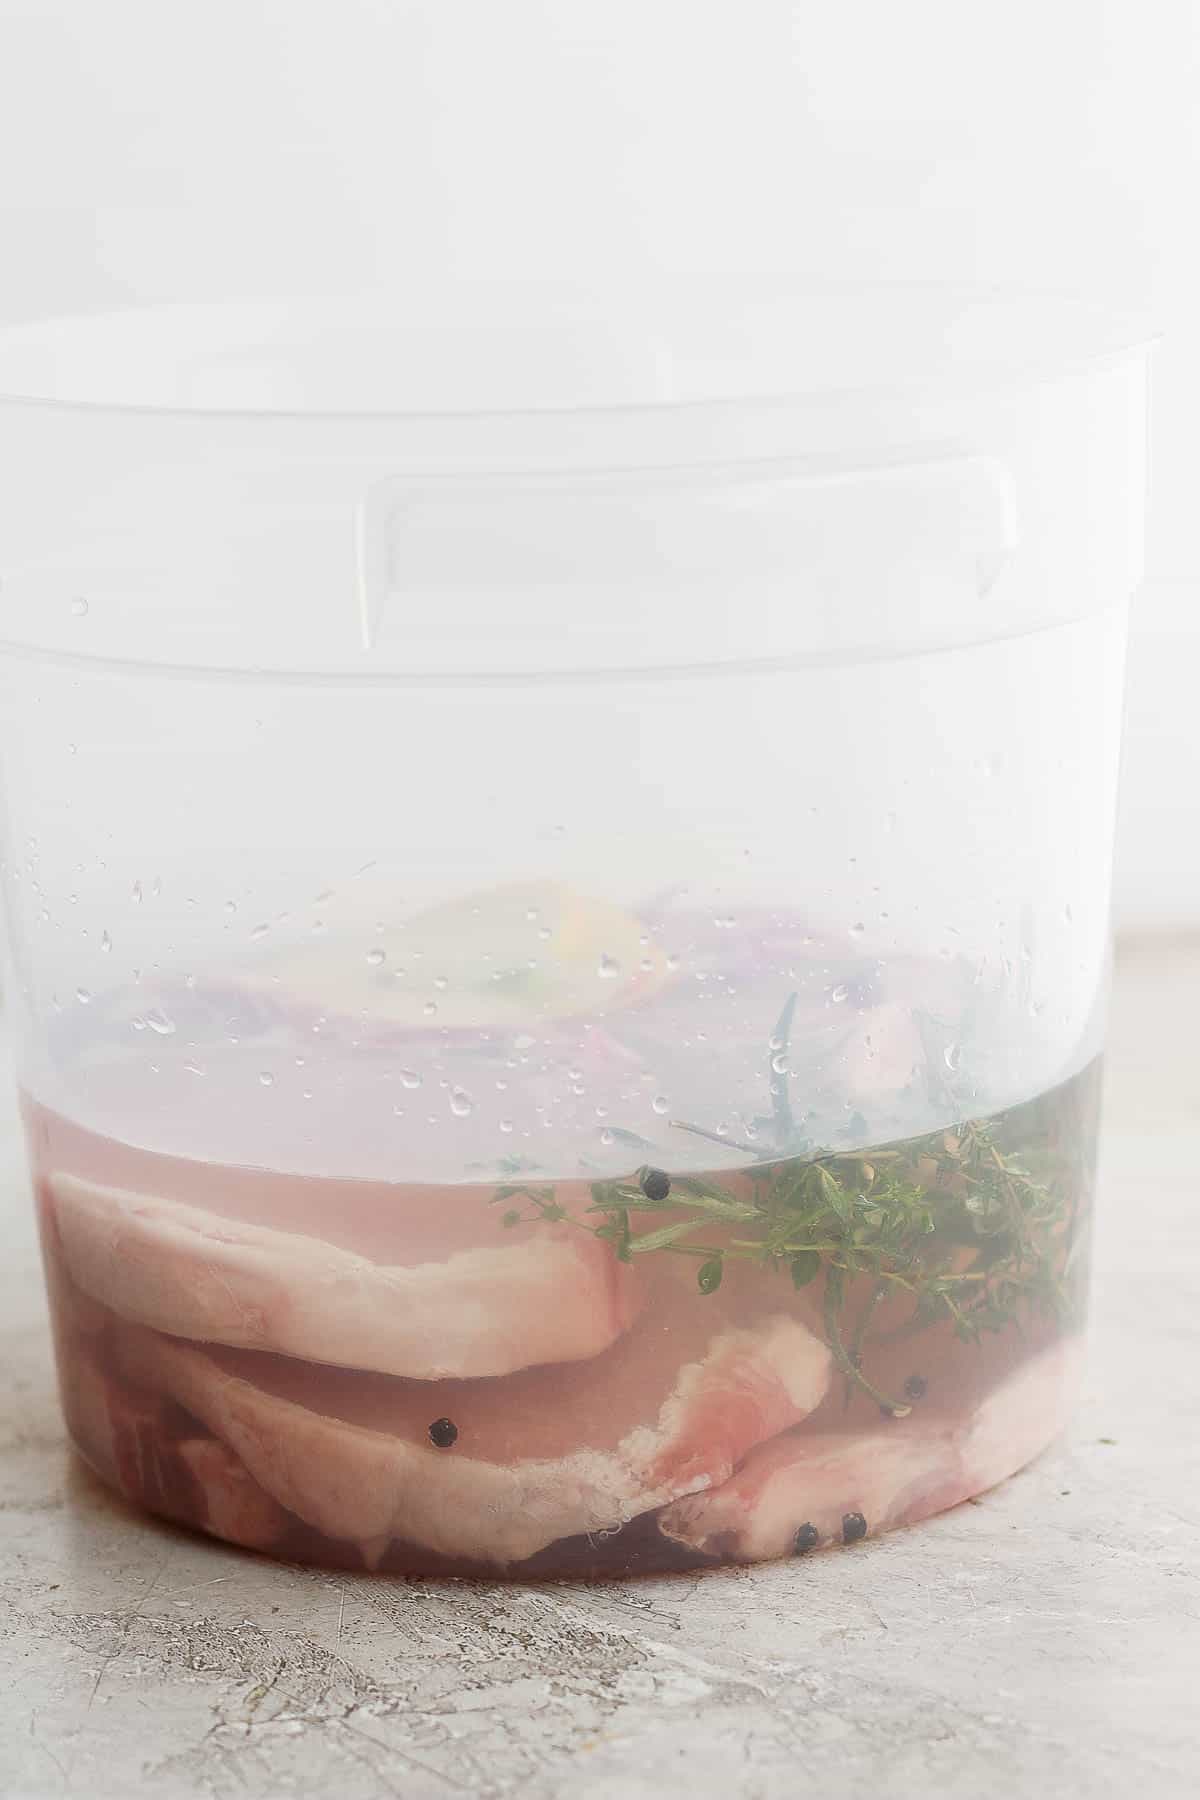 Pork chops, thyme, rosemary, onion, peppercorns, apple, bay leaf, salt and water in a food safe container. 